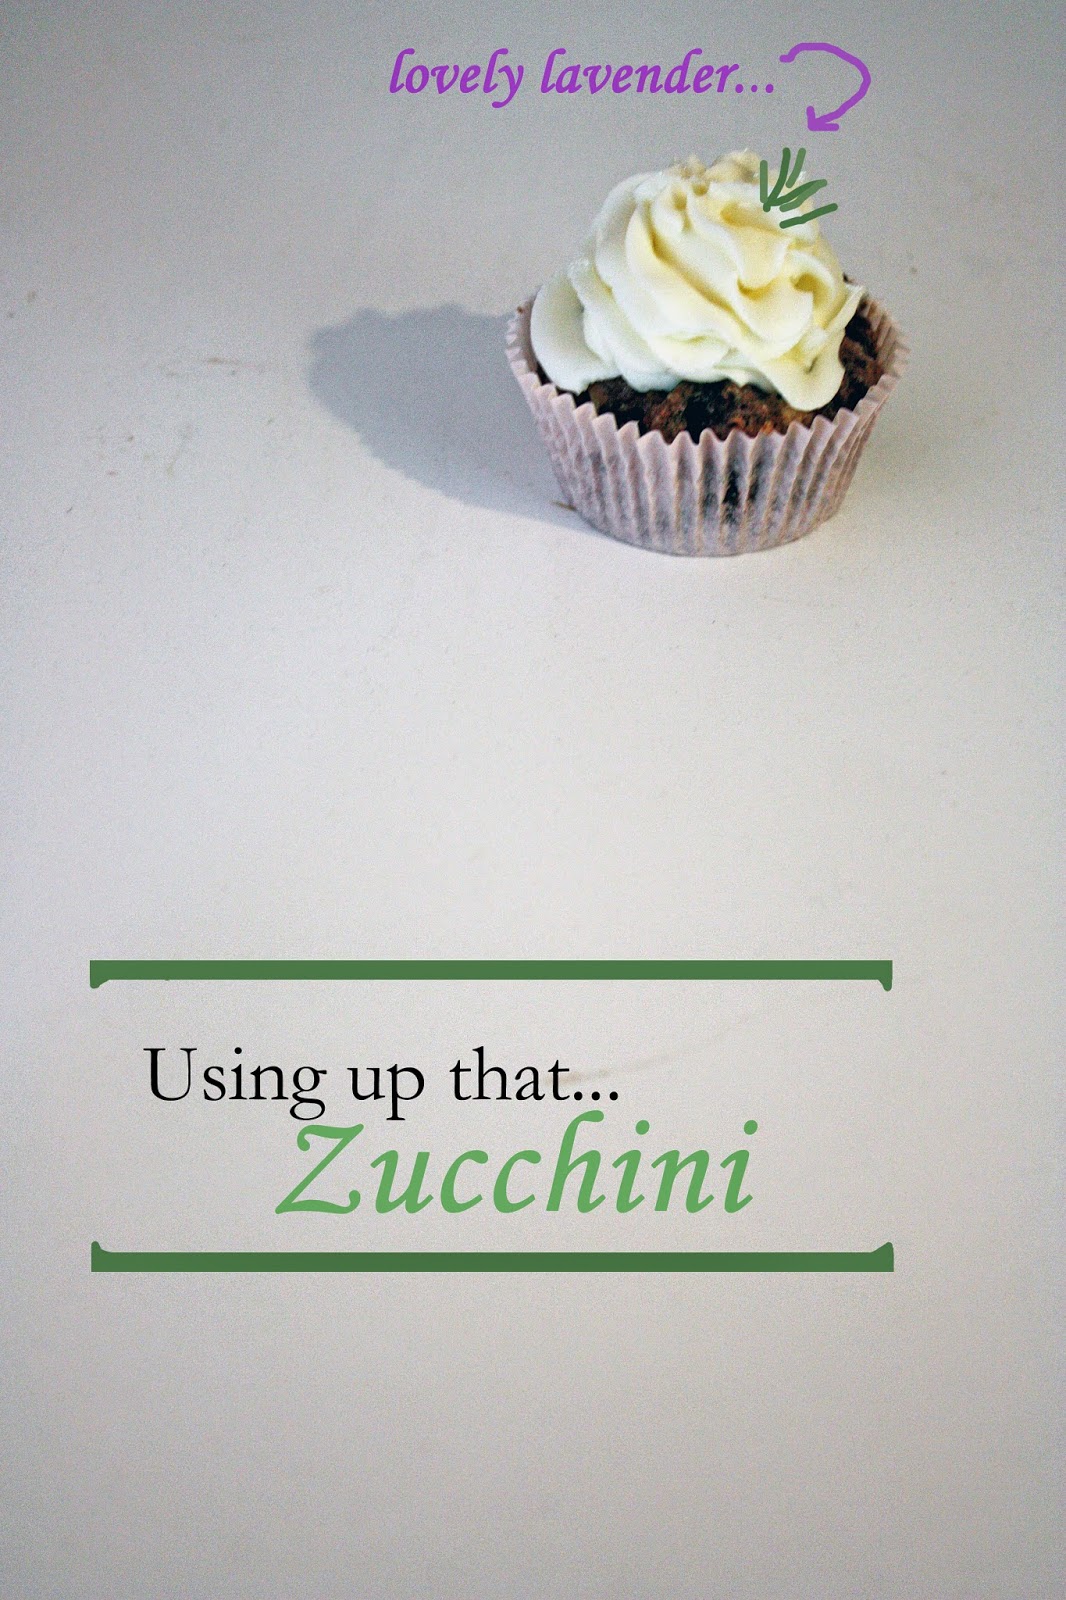 vegan fudgy zucchini brownie cupcakes with lavender buttercream